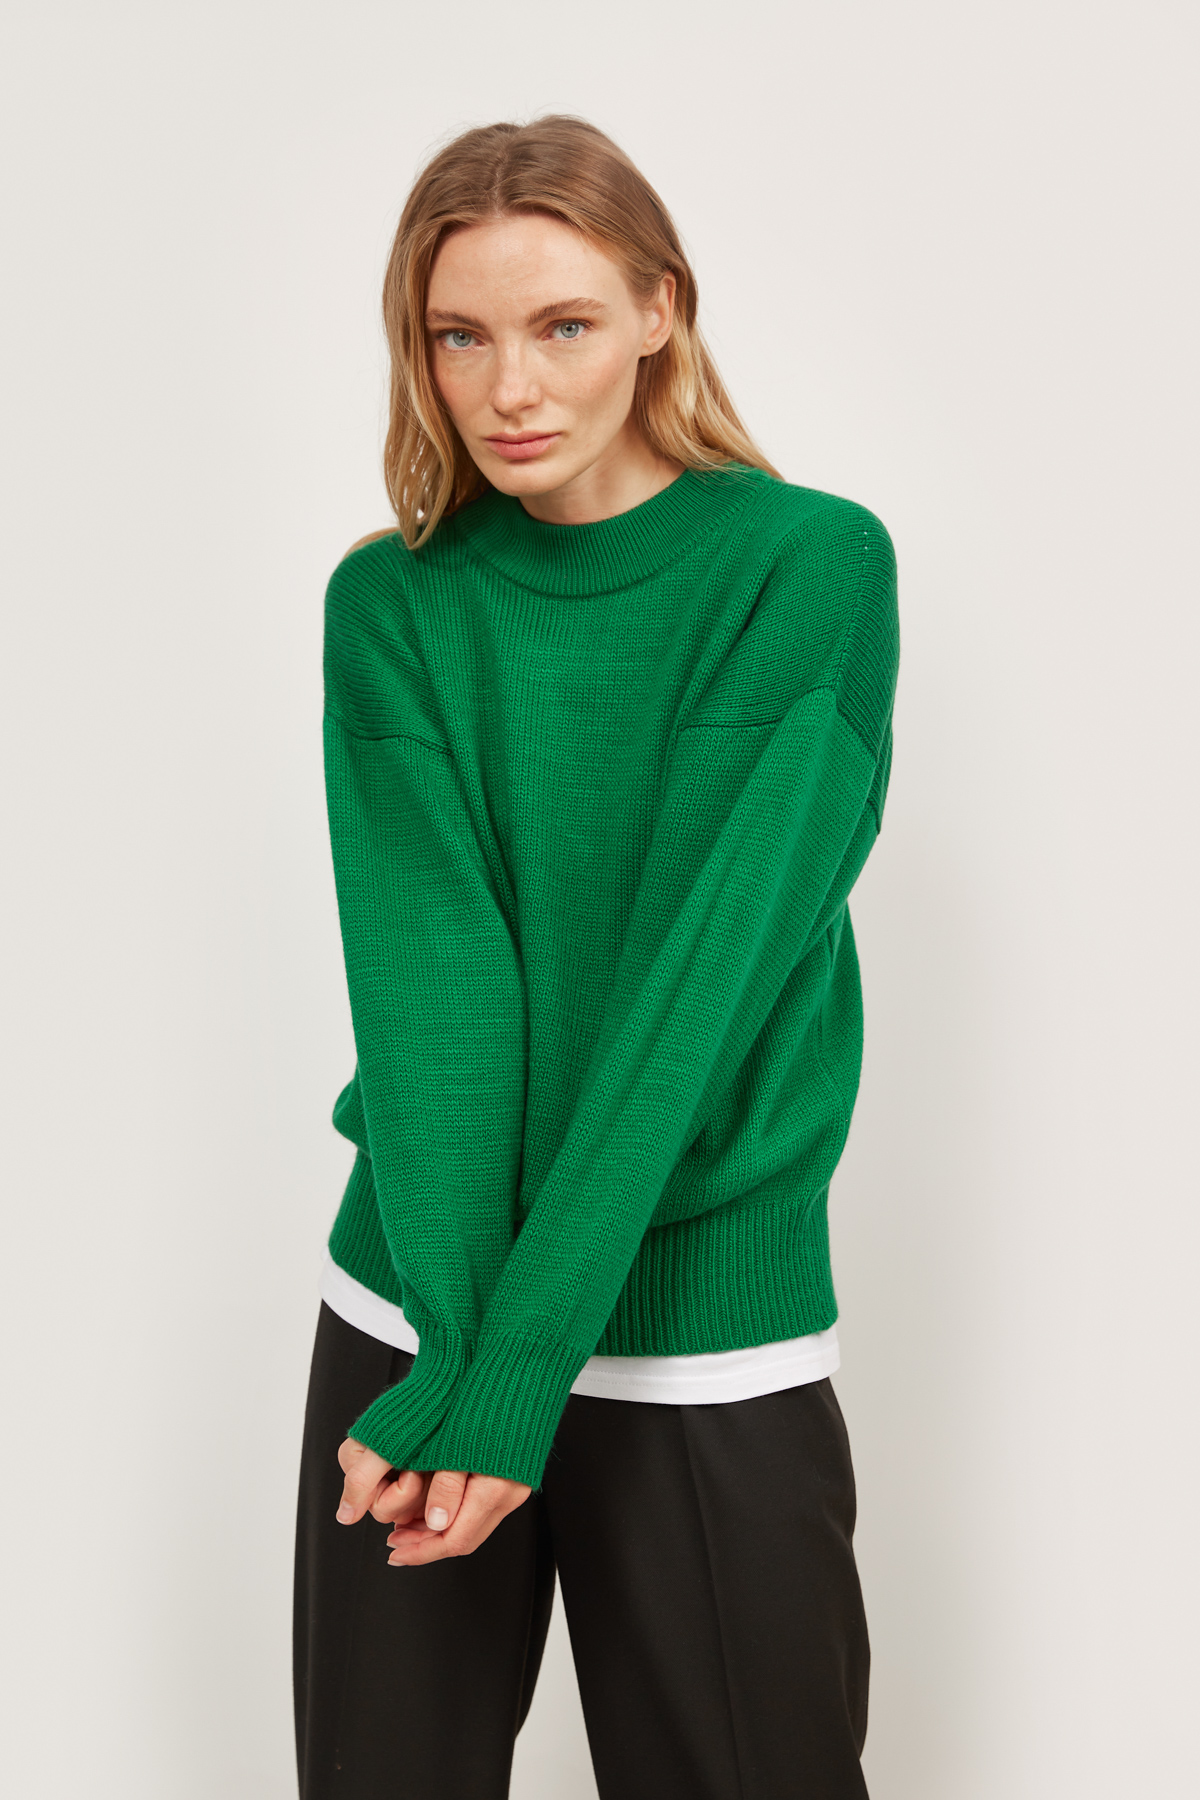 Bright green knitted sweater, photo 1